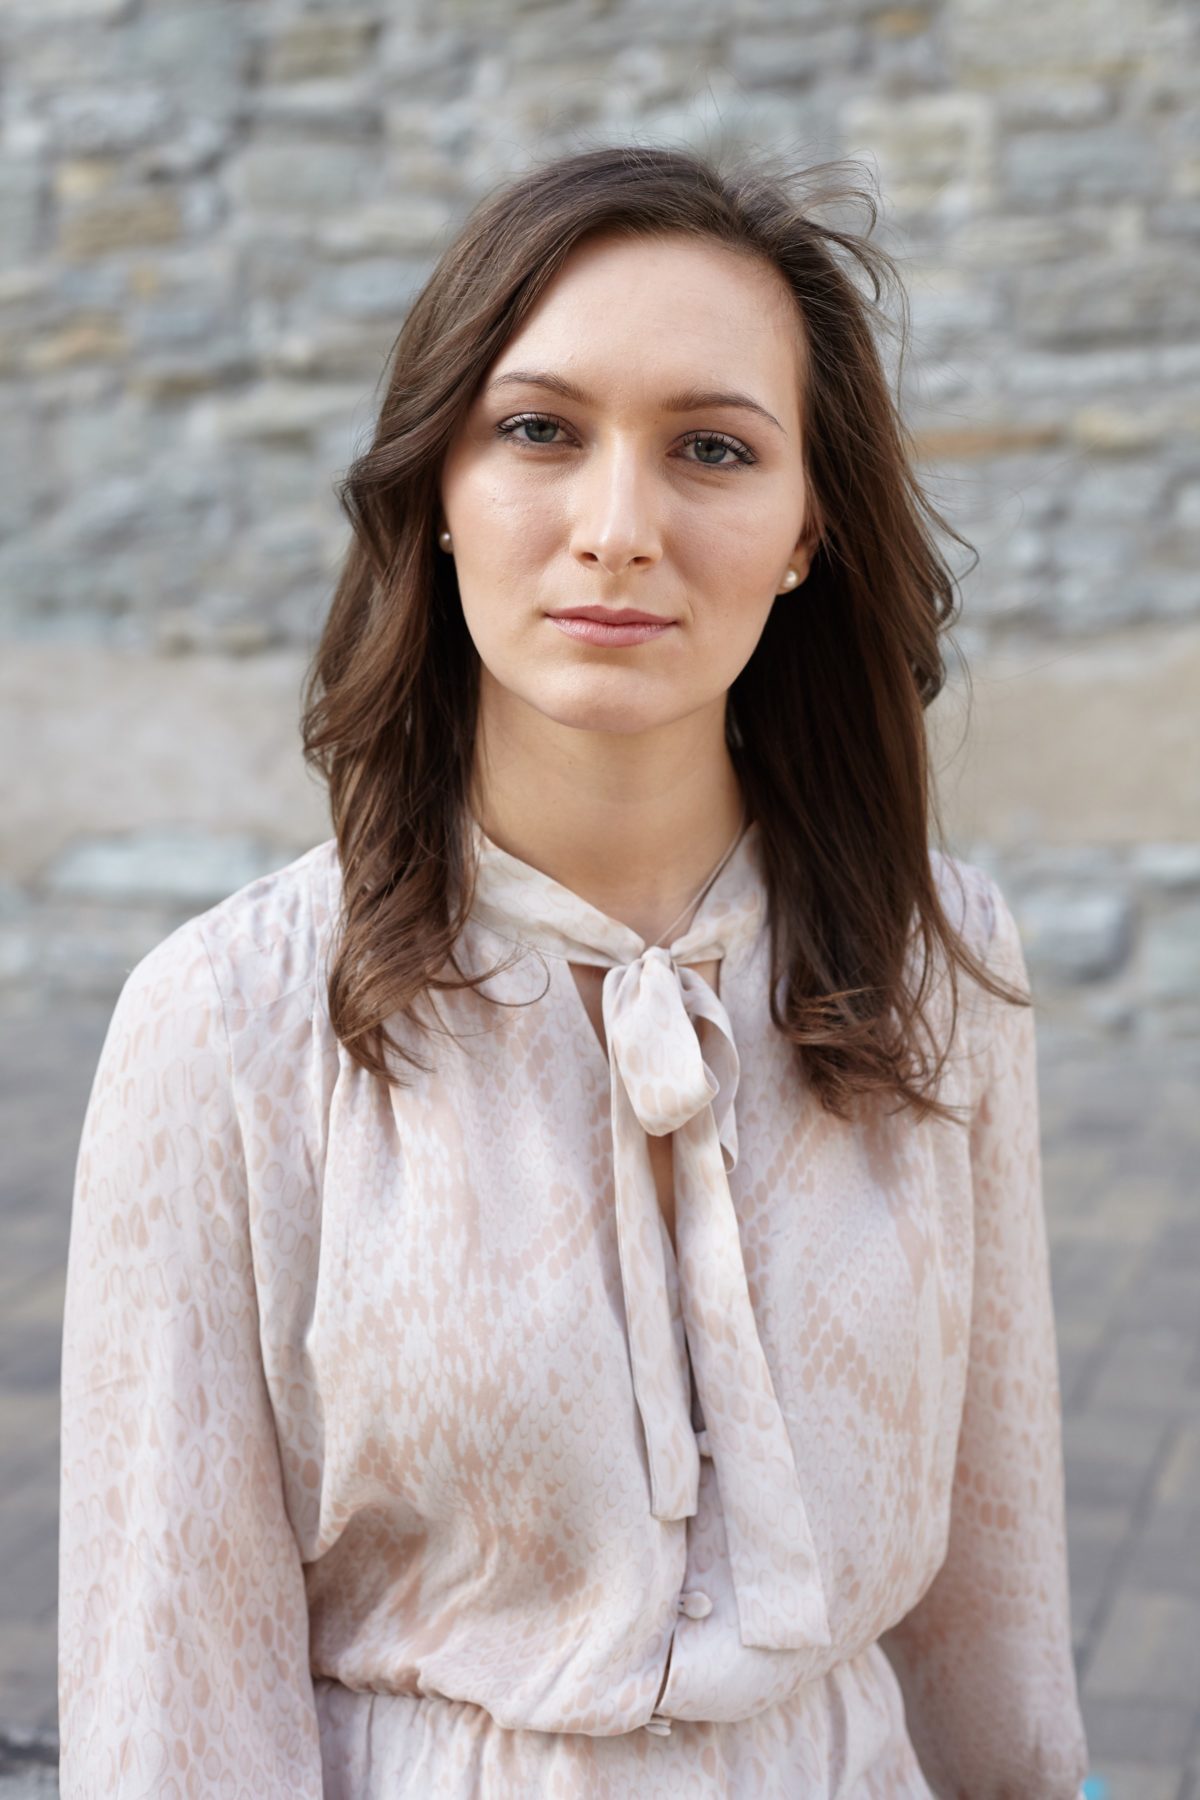 Person with medium length brown hair wearing a light pink blouse